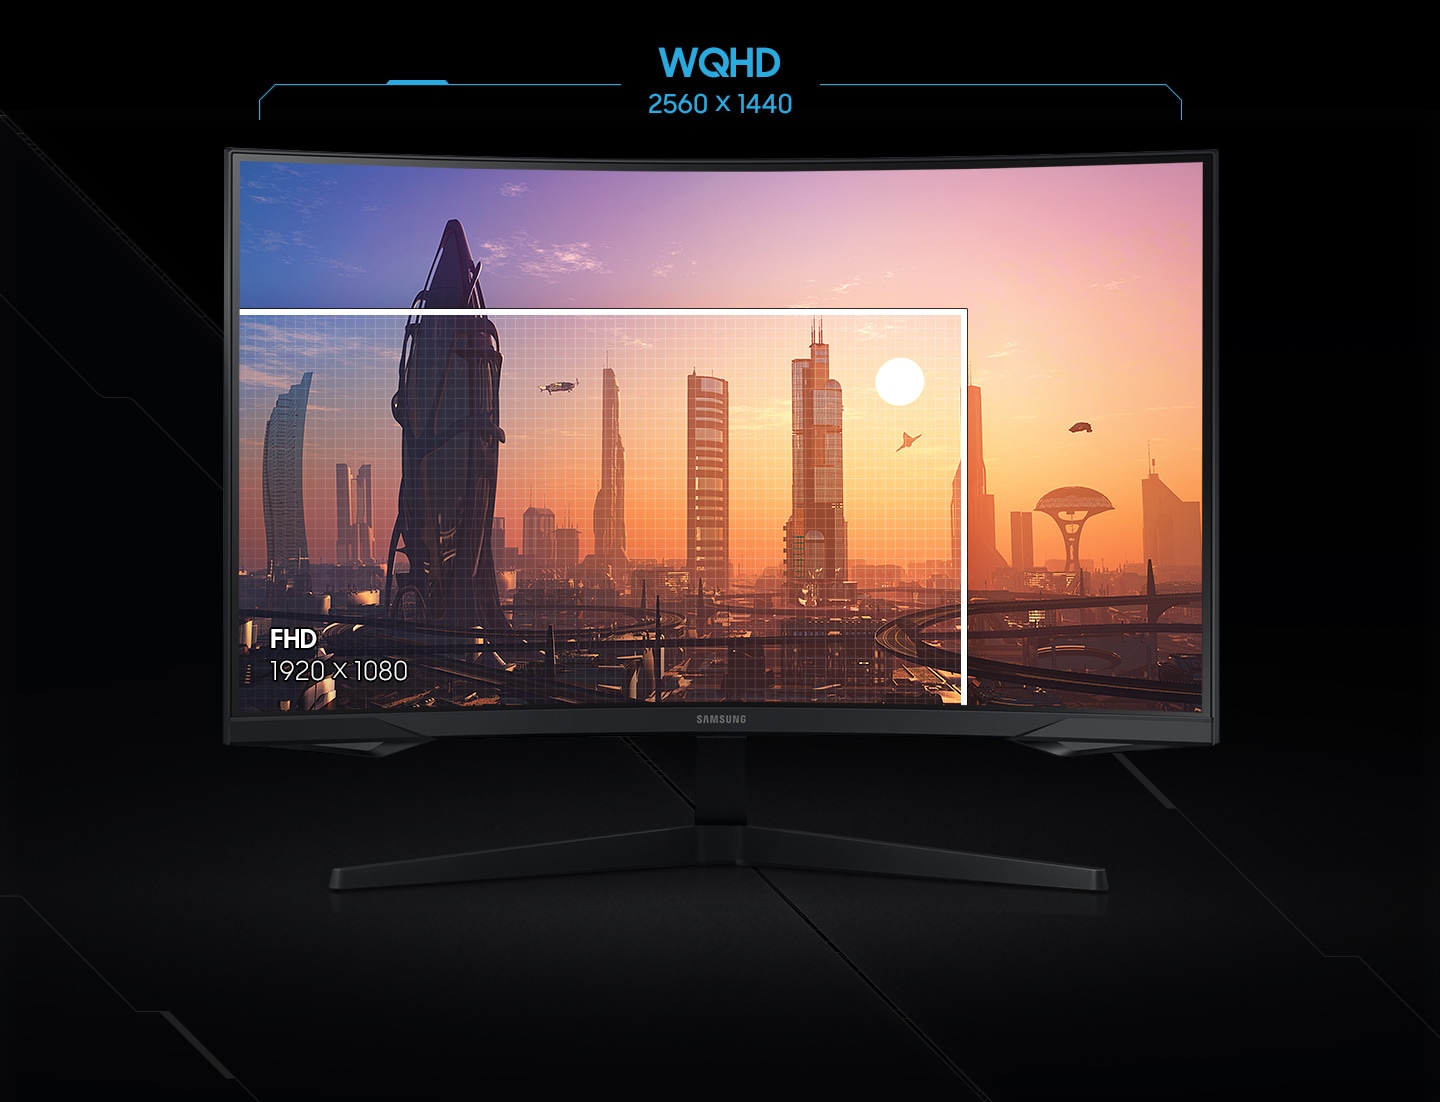 Your gaming world, now astoundingly lifelike. Packing in 1.7 times the pixel density of Full HD, WQHD resolution boasts incredibly detailed, pin-sharp images. Experience a fuller view with more space to take in all the action.